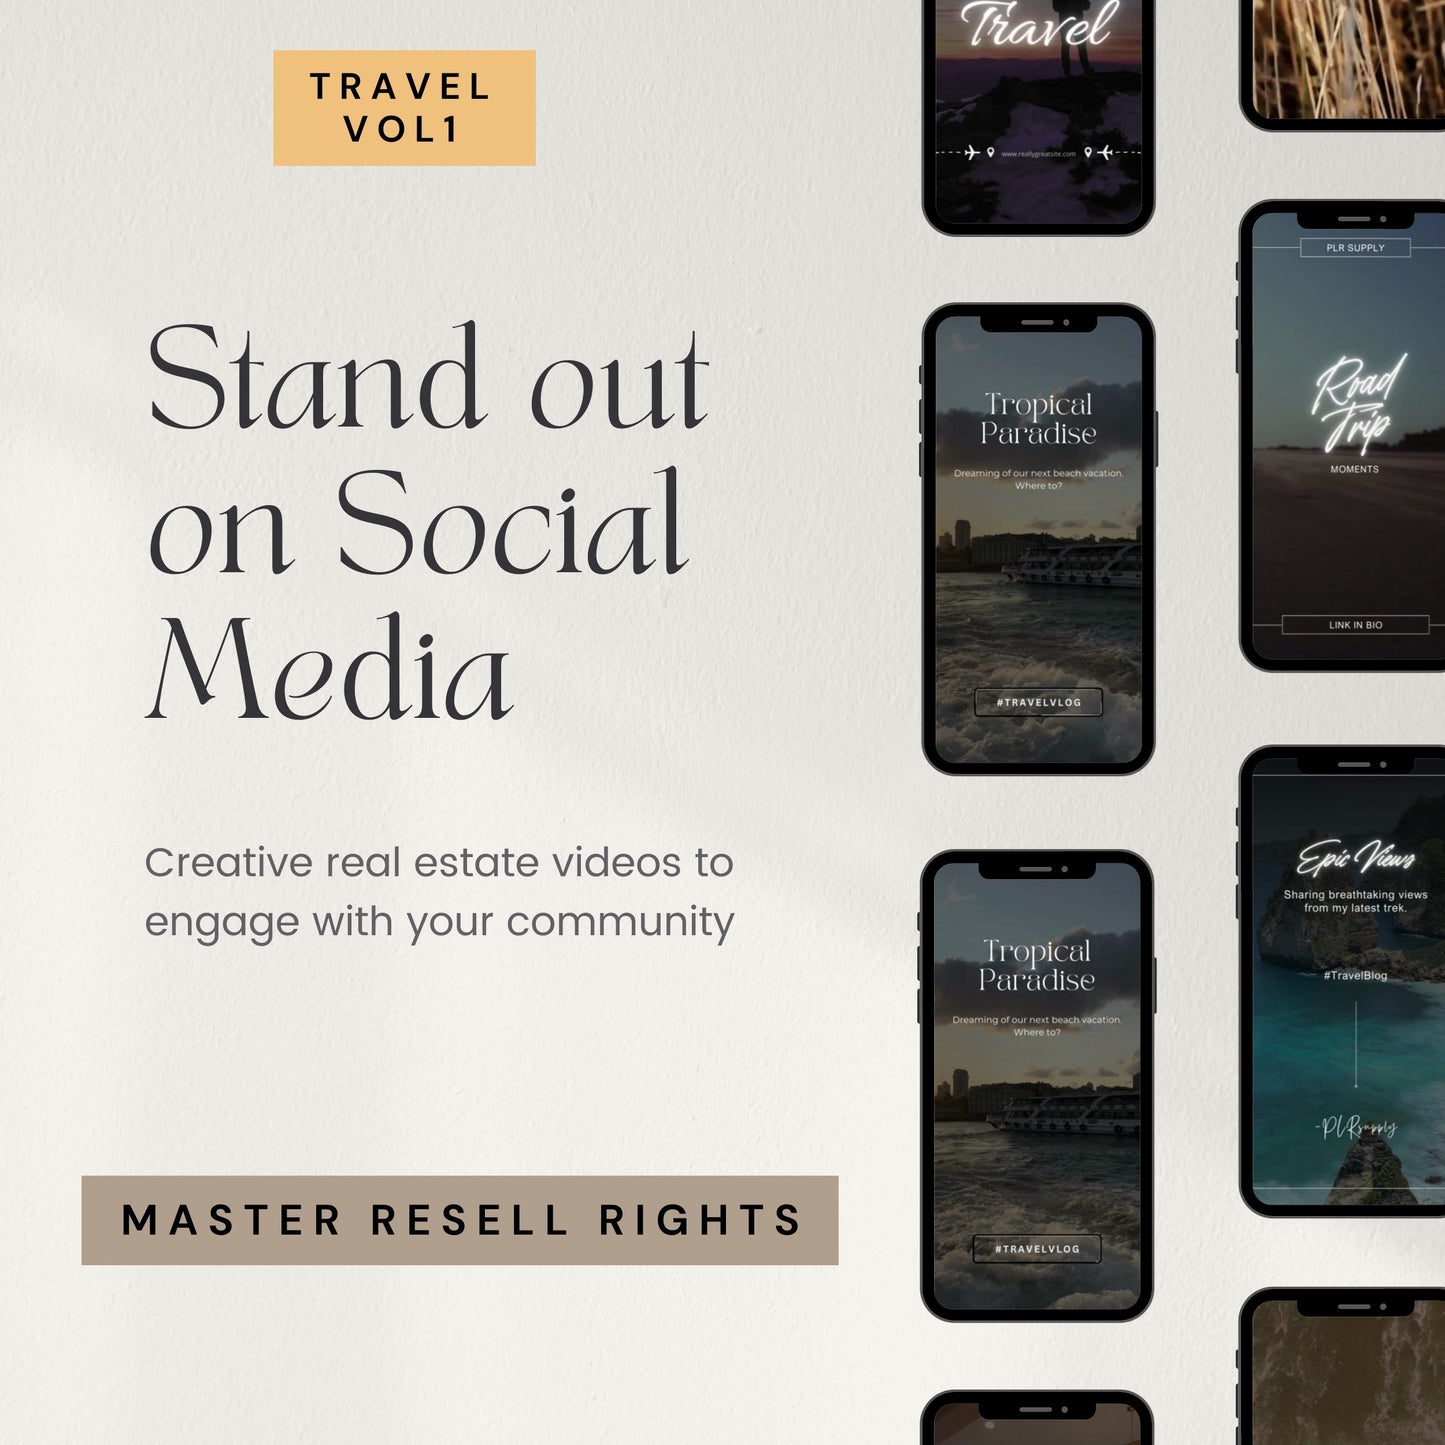 Faceless Travel Instagram Reels Bundle Master Resell Rights- DFY Digital Product